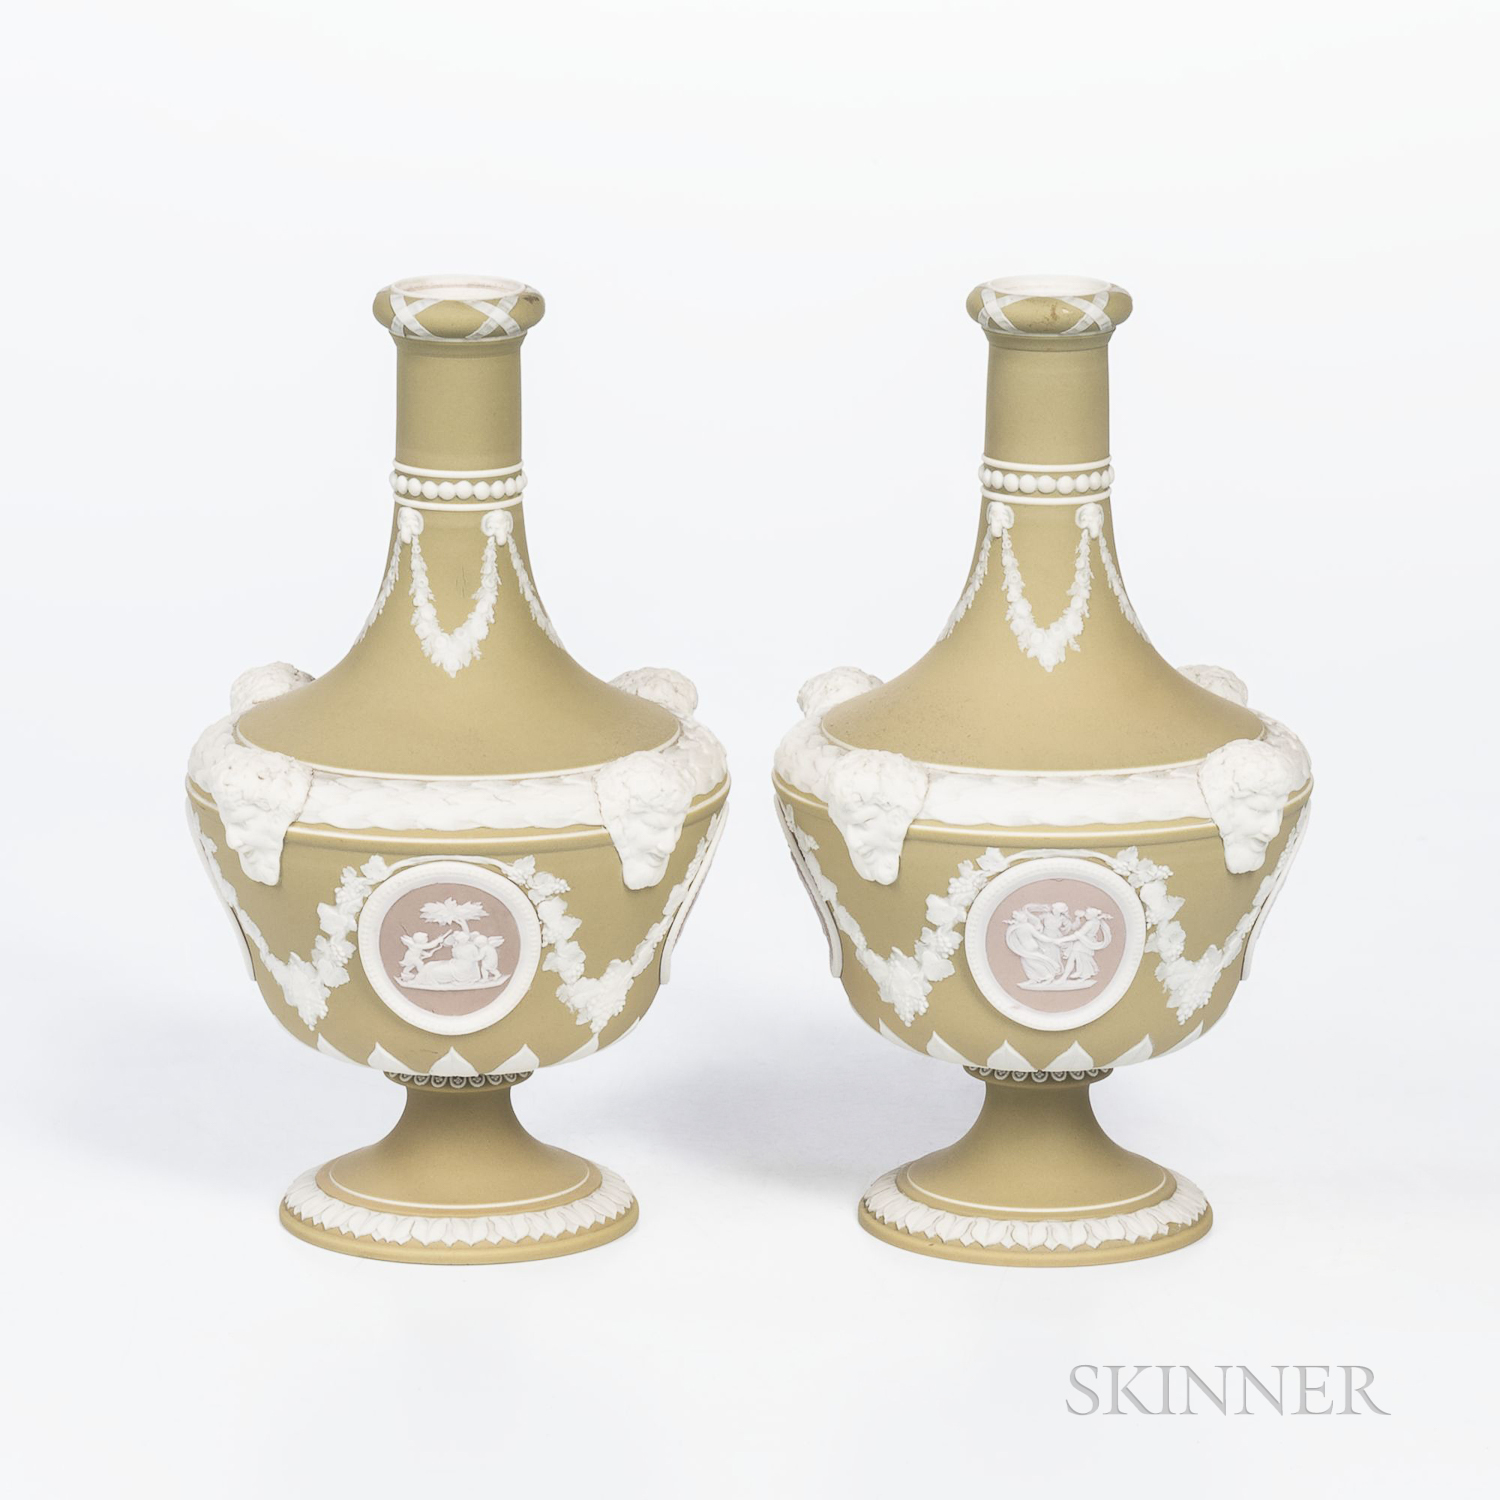 Pair of Wedgwood Tricolor Jasper Barber Bottles, England, late 19th century, green ground with lilac